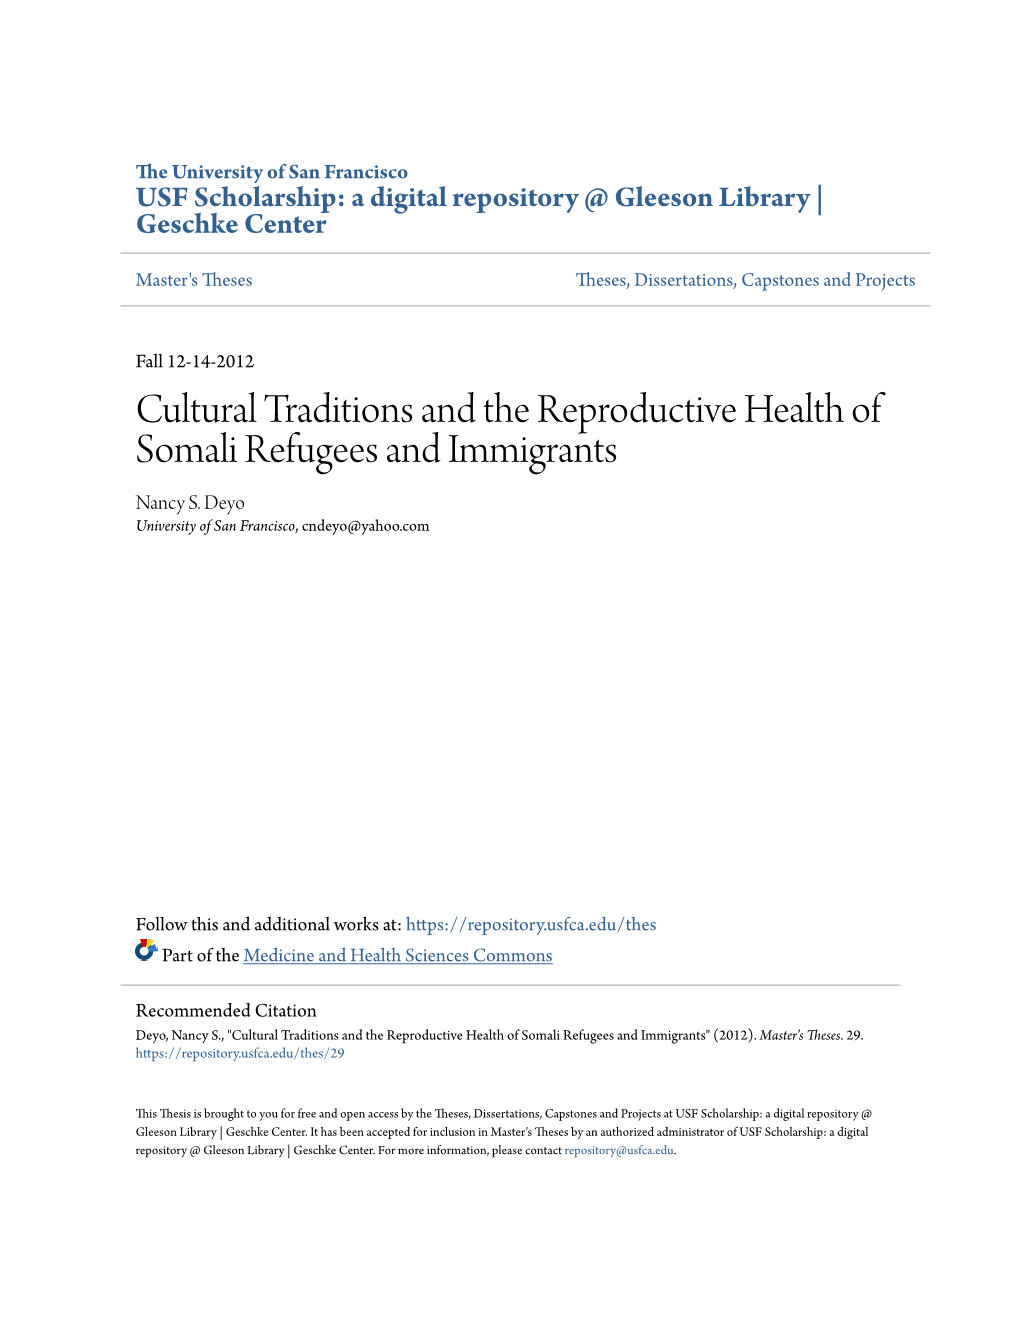 Cultural Traditions and the Reproductive Health of Somali Refugees and Immigrants Nancy S